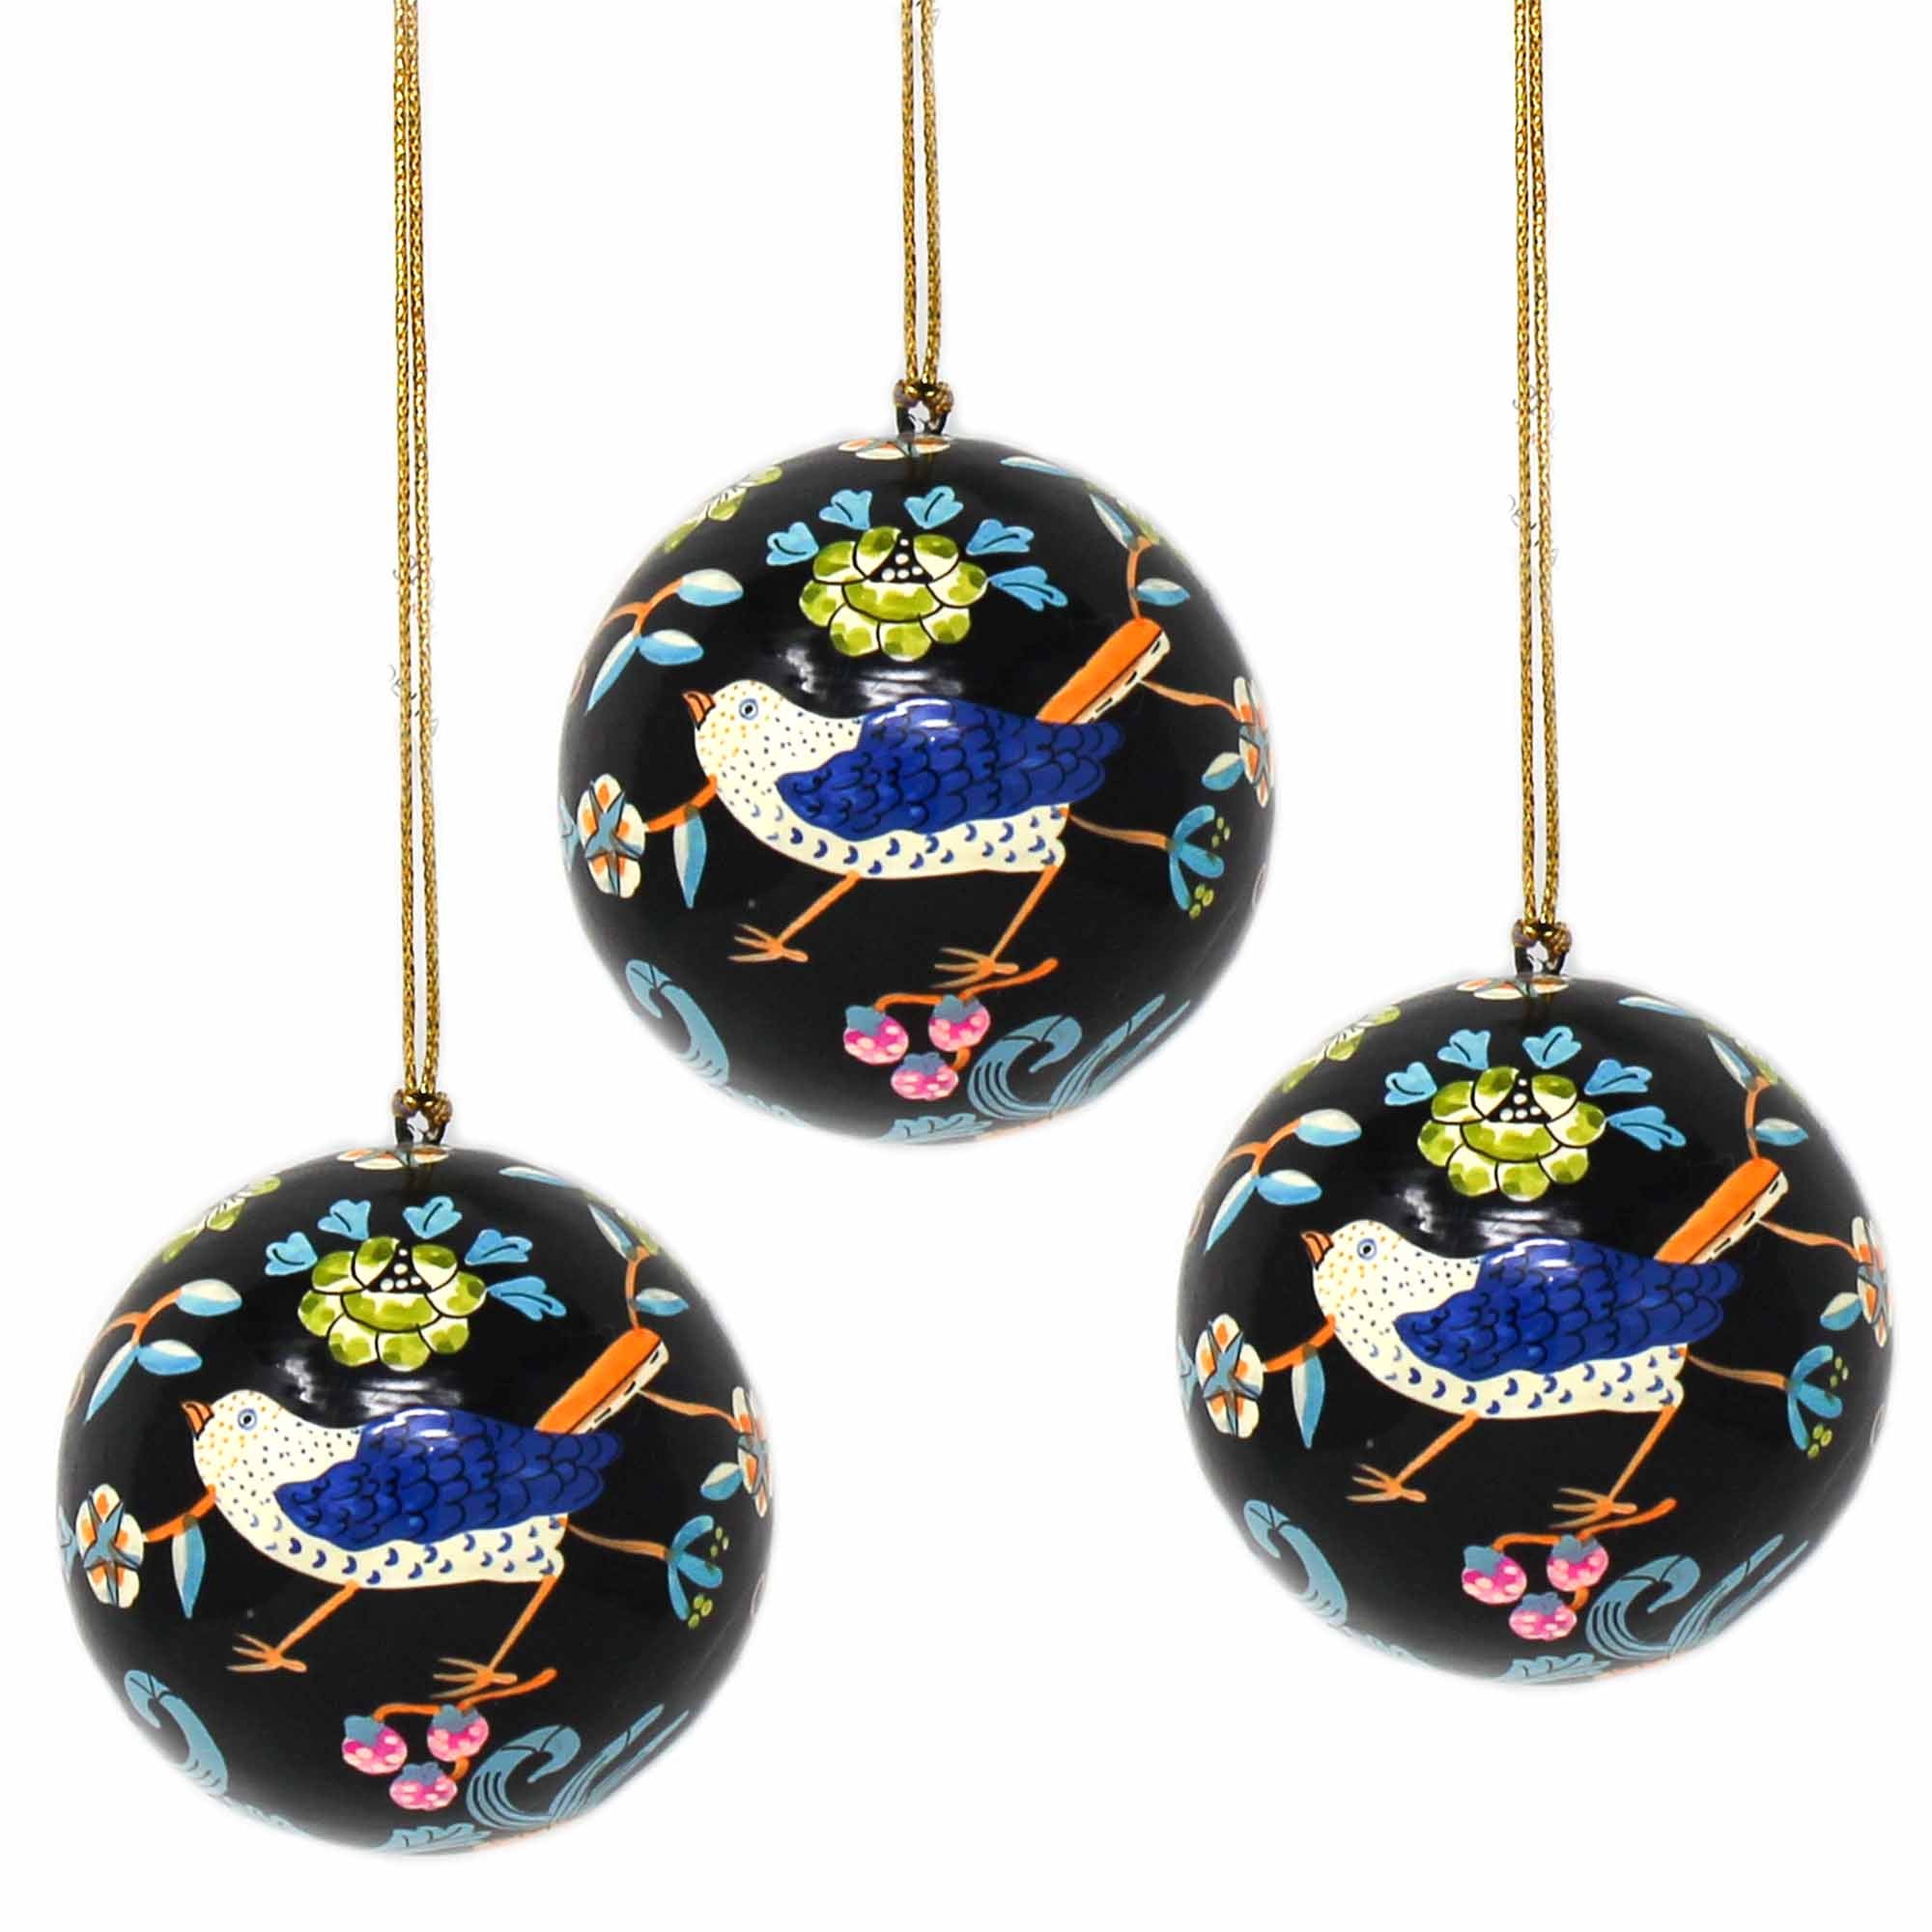 Handpainted Ornament Birds and Flowers, Black - Pack of 3